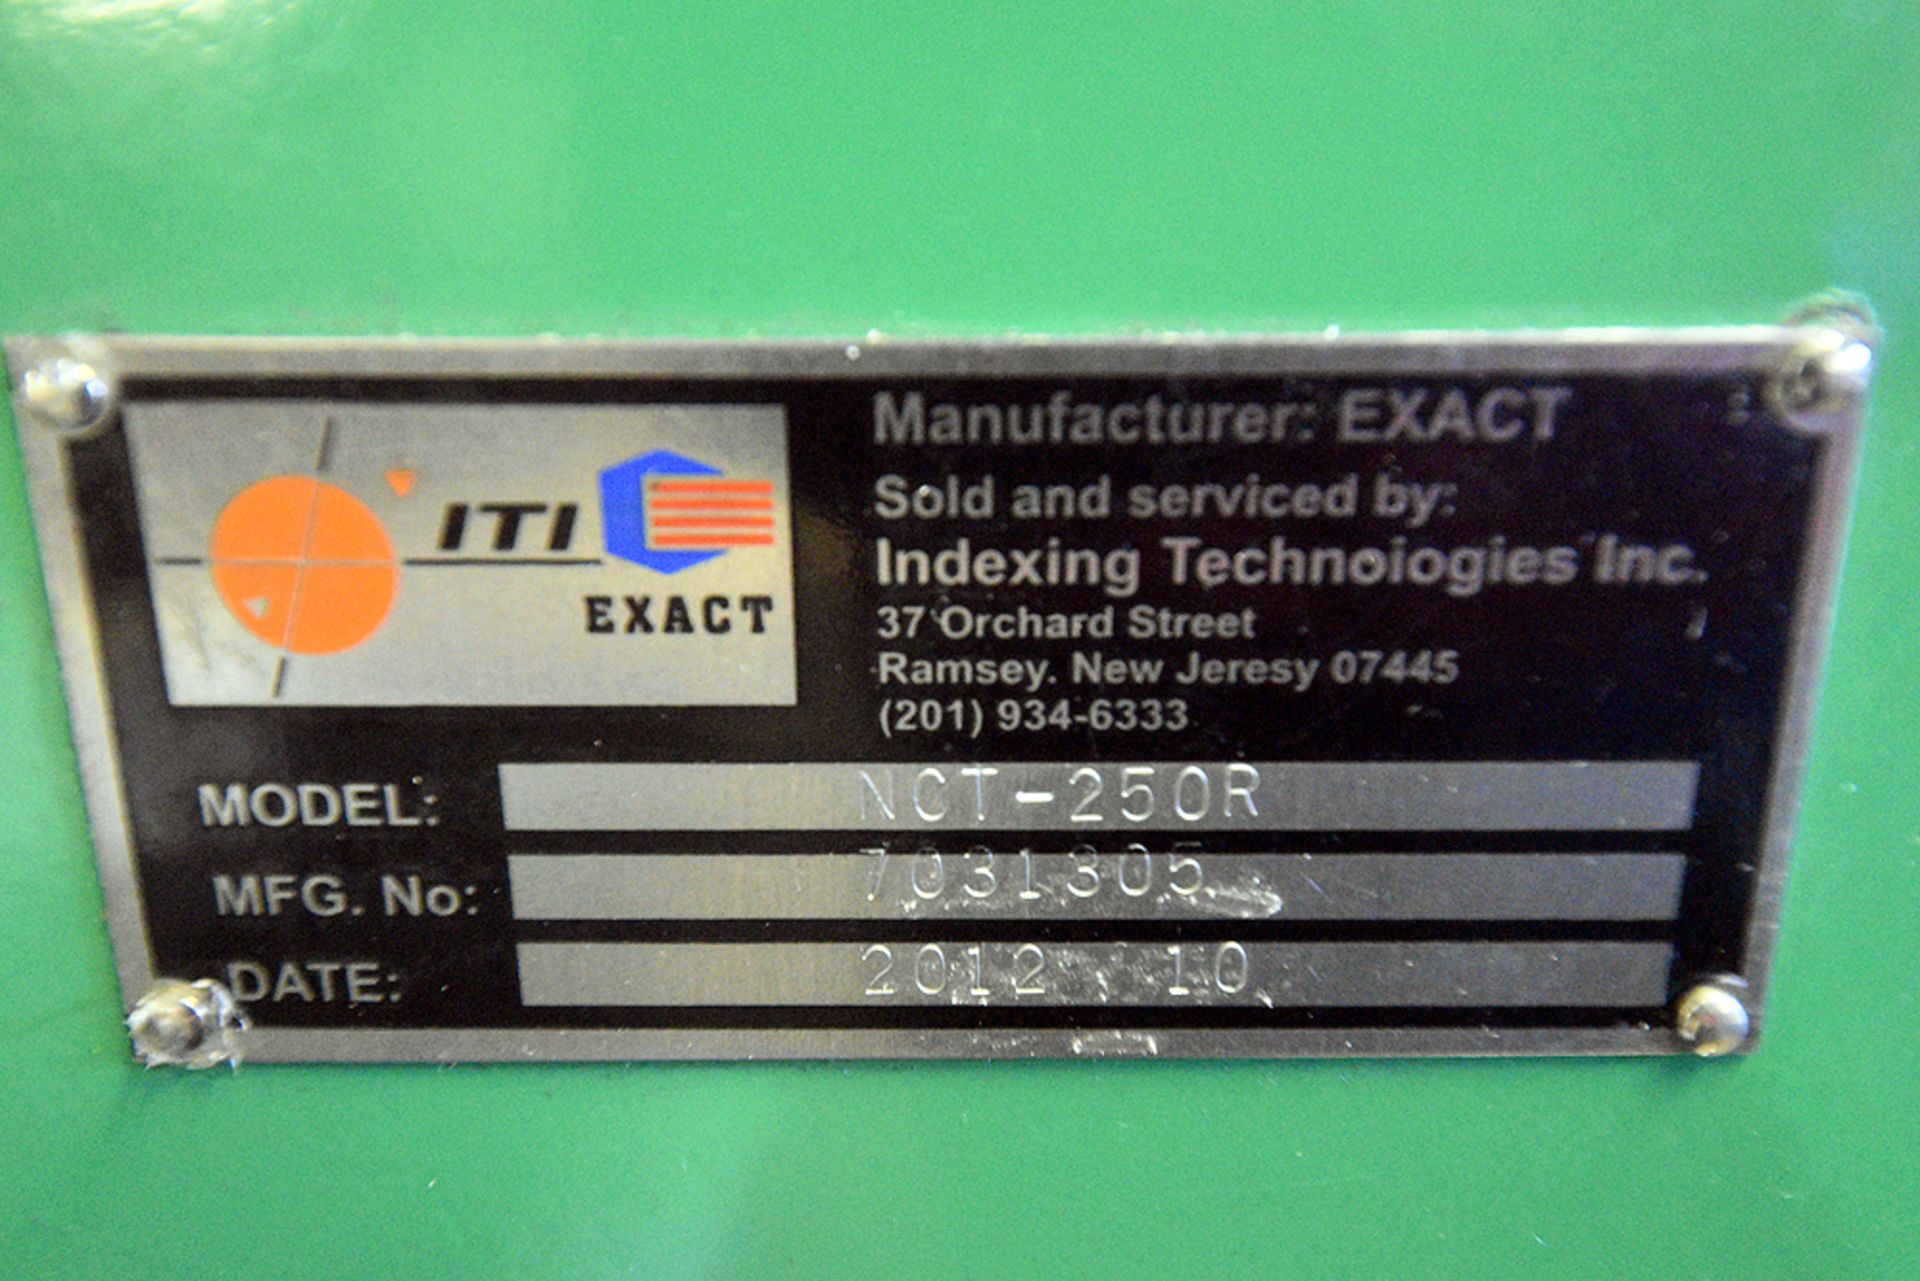 ITI Exact model NCT-250R CNC rotary table, s/n 7031305 (10/2012), w/ Exact digital controller, w/ - Image 2 of 3